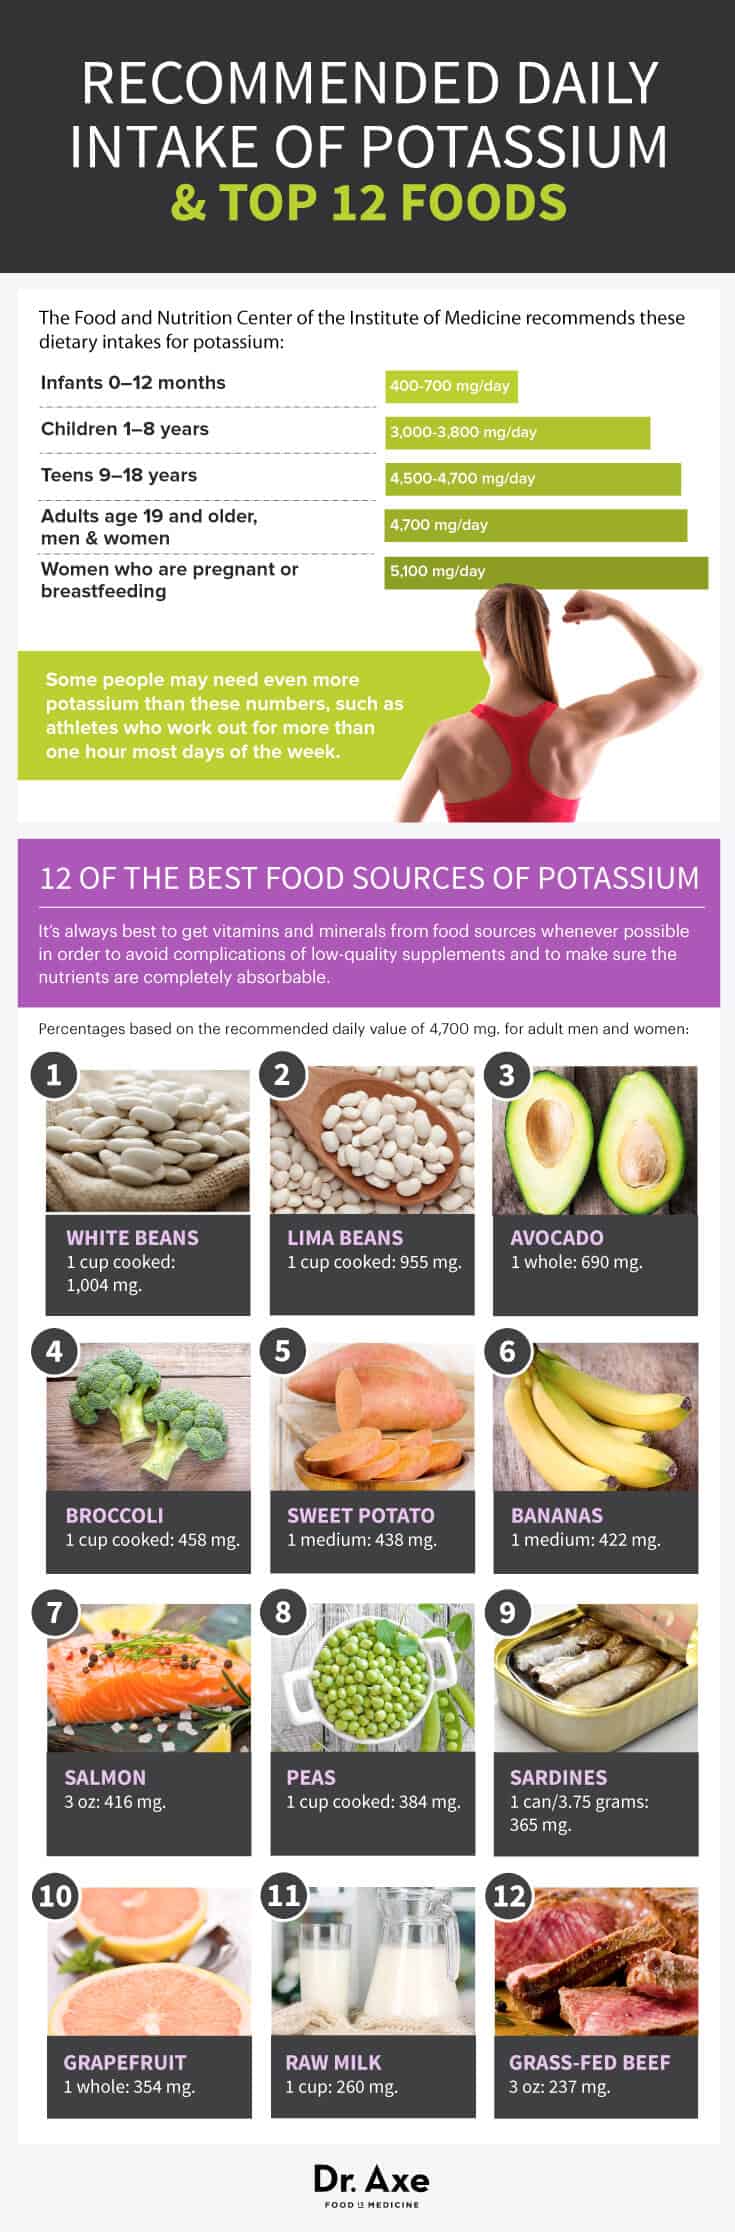 How much potassium do people need to stay healthy?